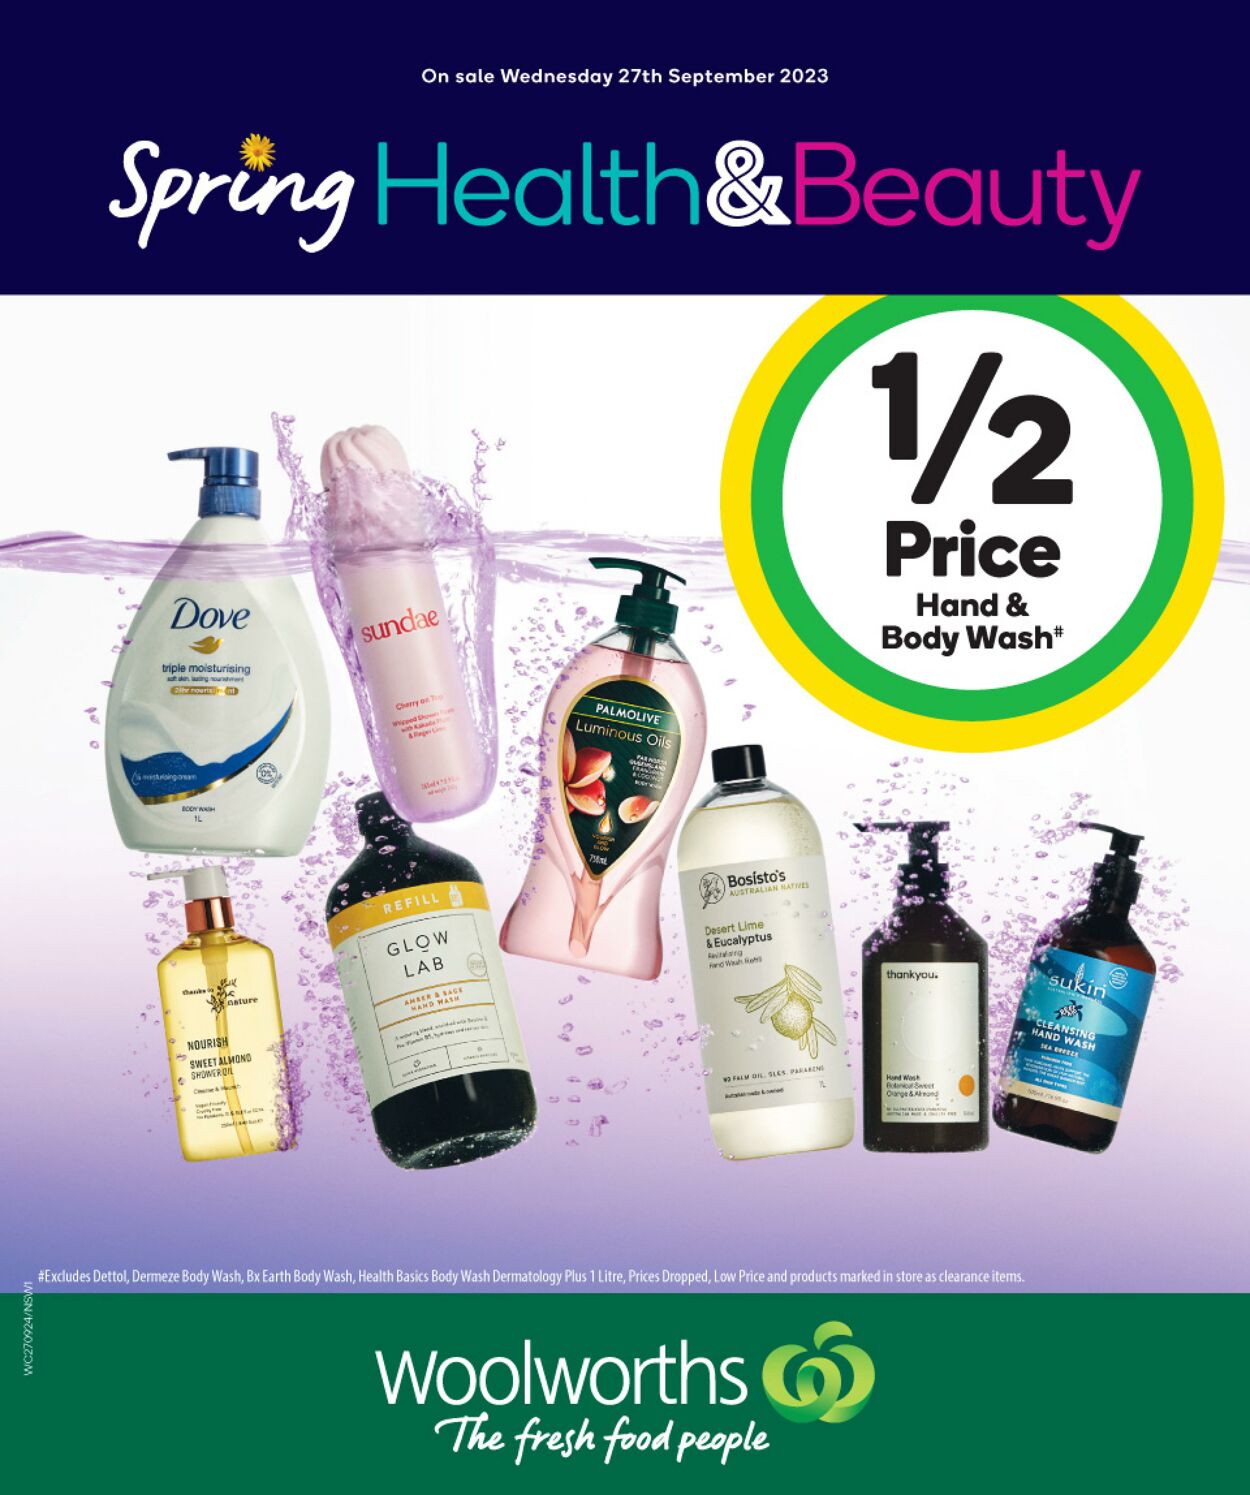 Catalogue Woolworths - Spring Health & Beauty NSW 27 Sep, 2023 - 3 Oct, 2023